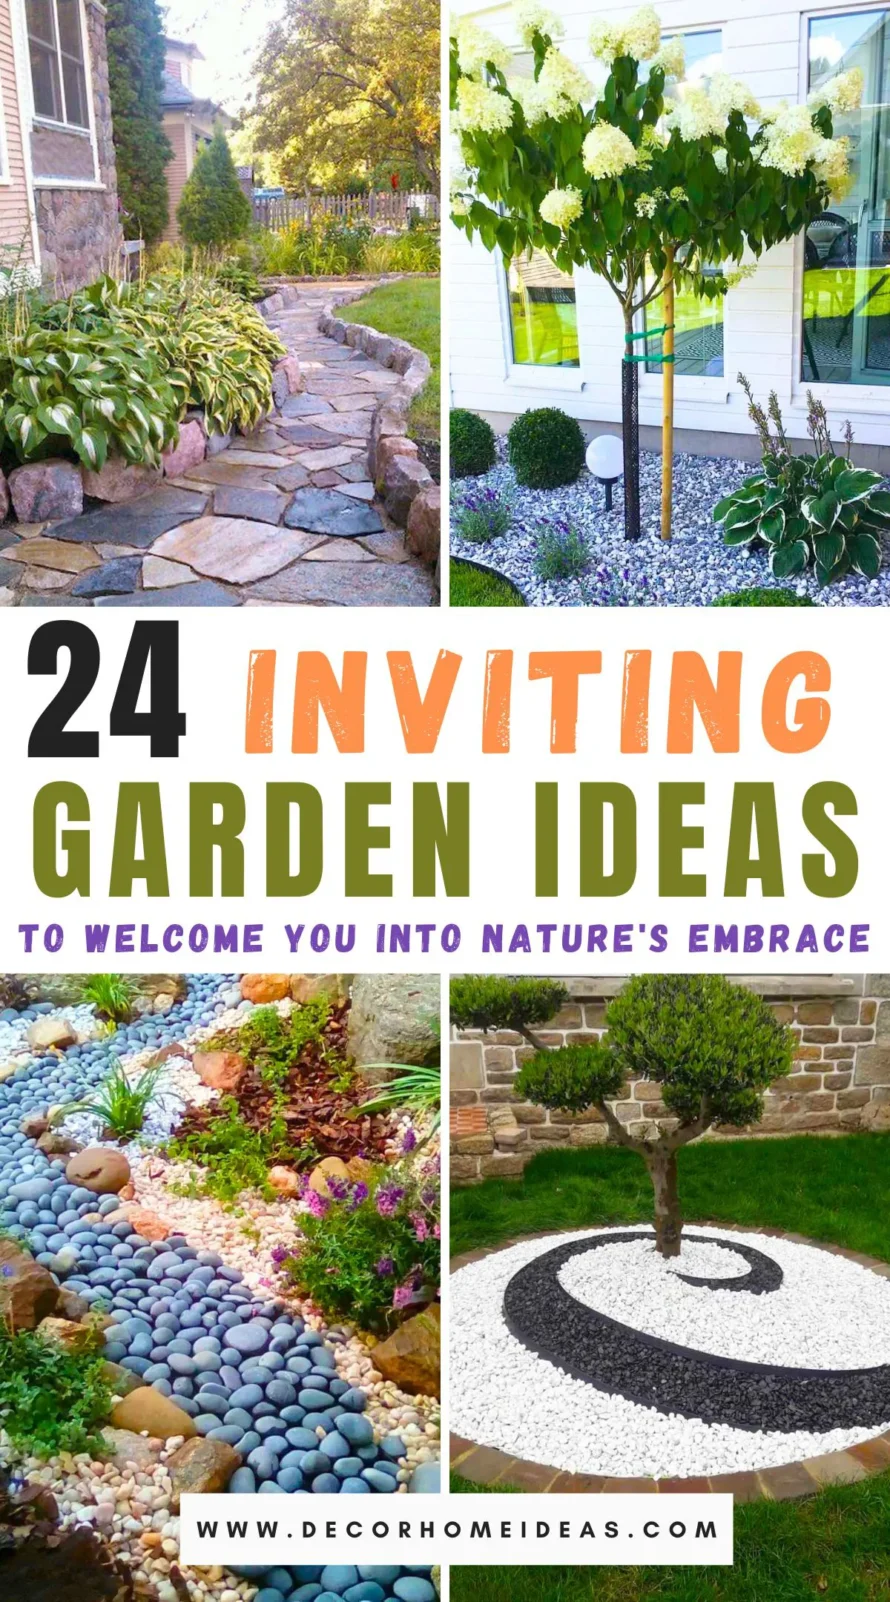 Explore 24 inviting garden designs that elevate every moment. From tranquil Zen retreats to vibrant floral displays, these inspired designs transform outdoor spaces into havens of beauty and relaxation. Whether you're seeking a cozy corner for contemplation or a lively gathering spot for friends and family, these garden ideas create unforgettable settings for all occasions.